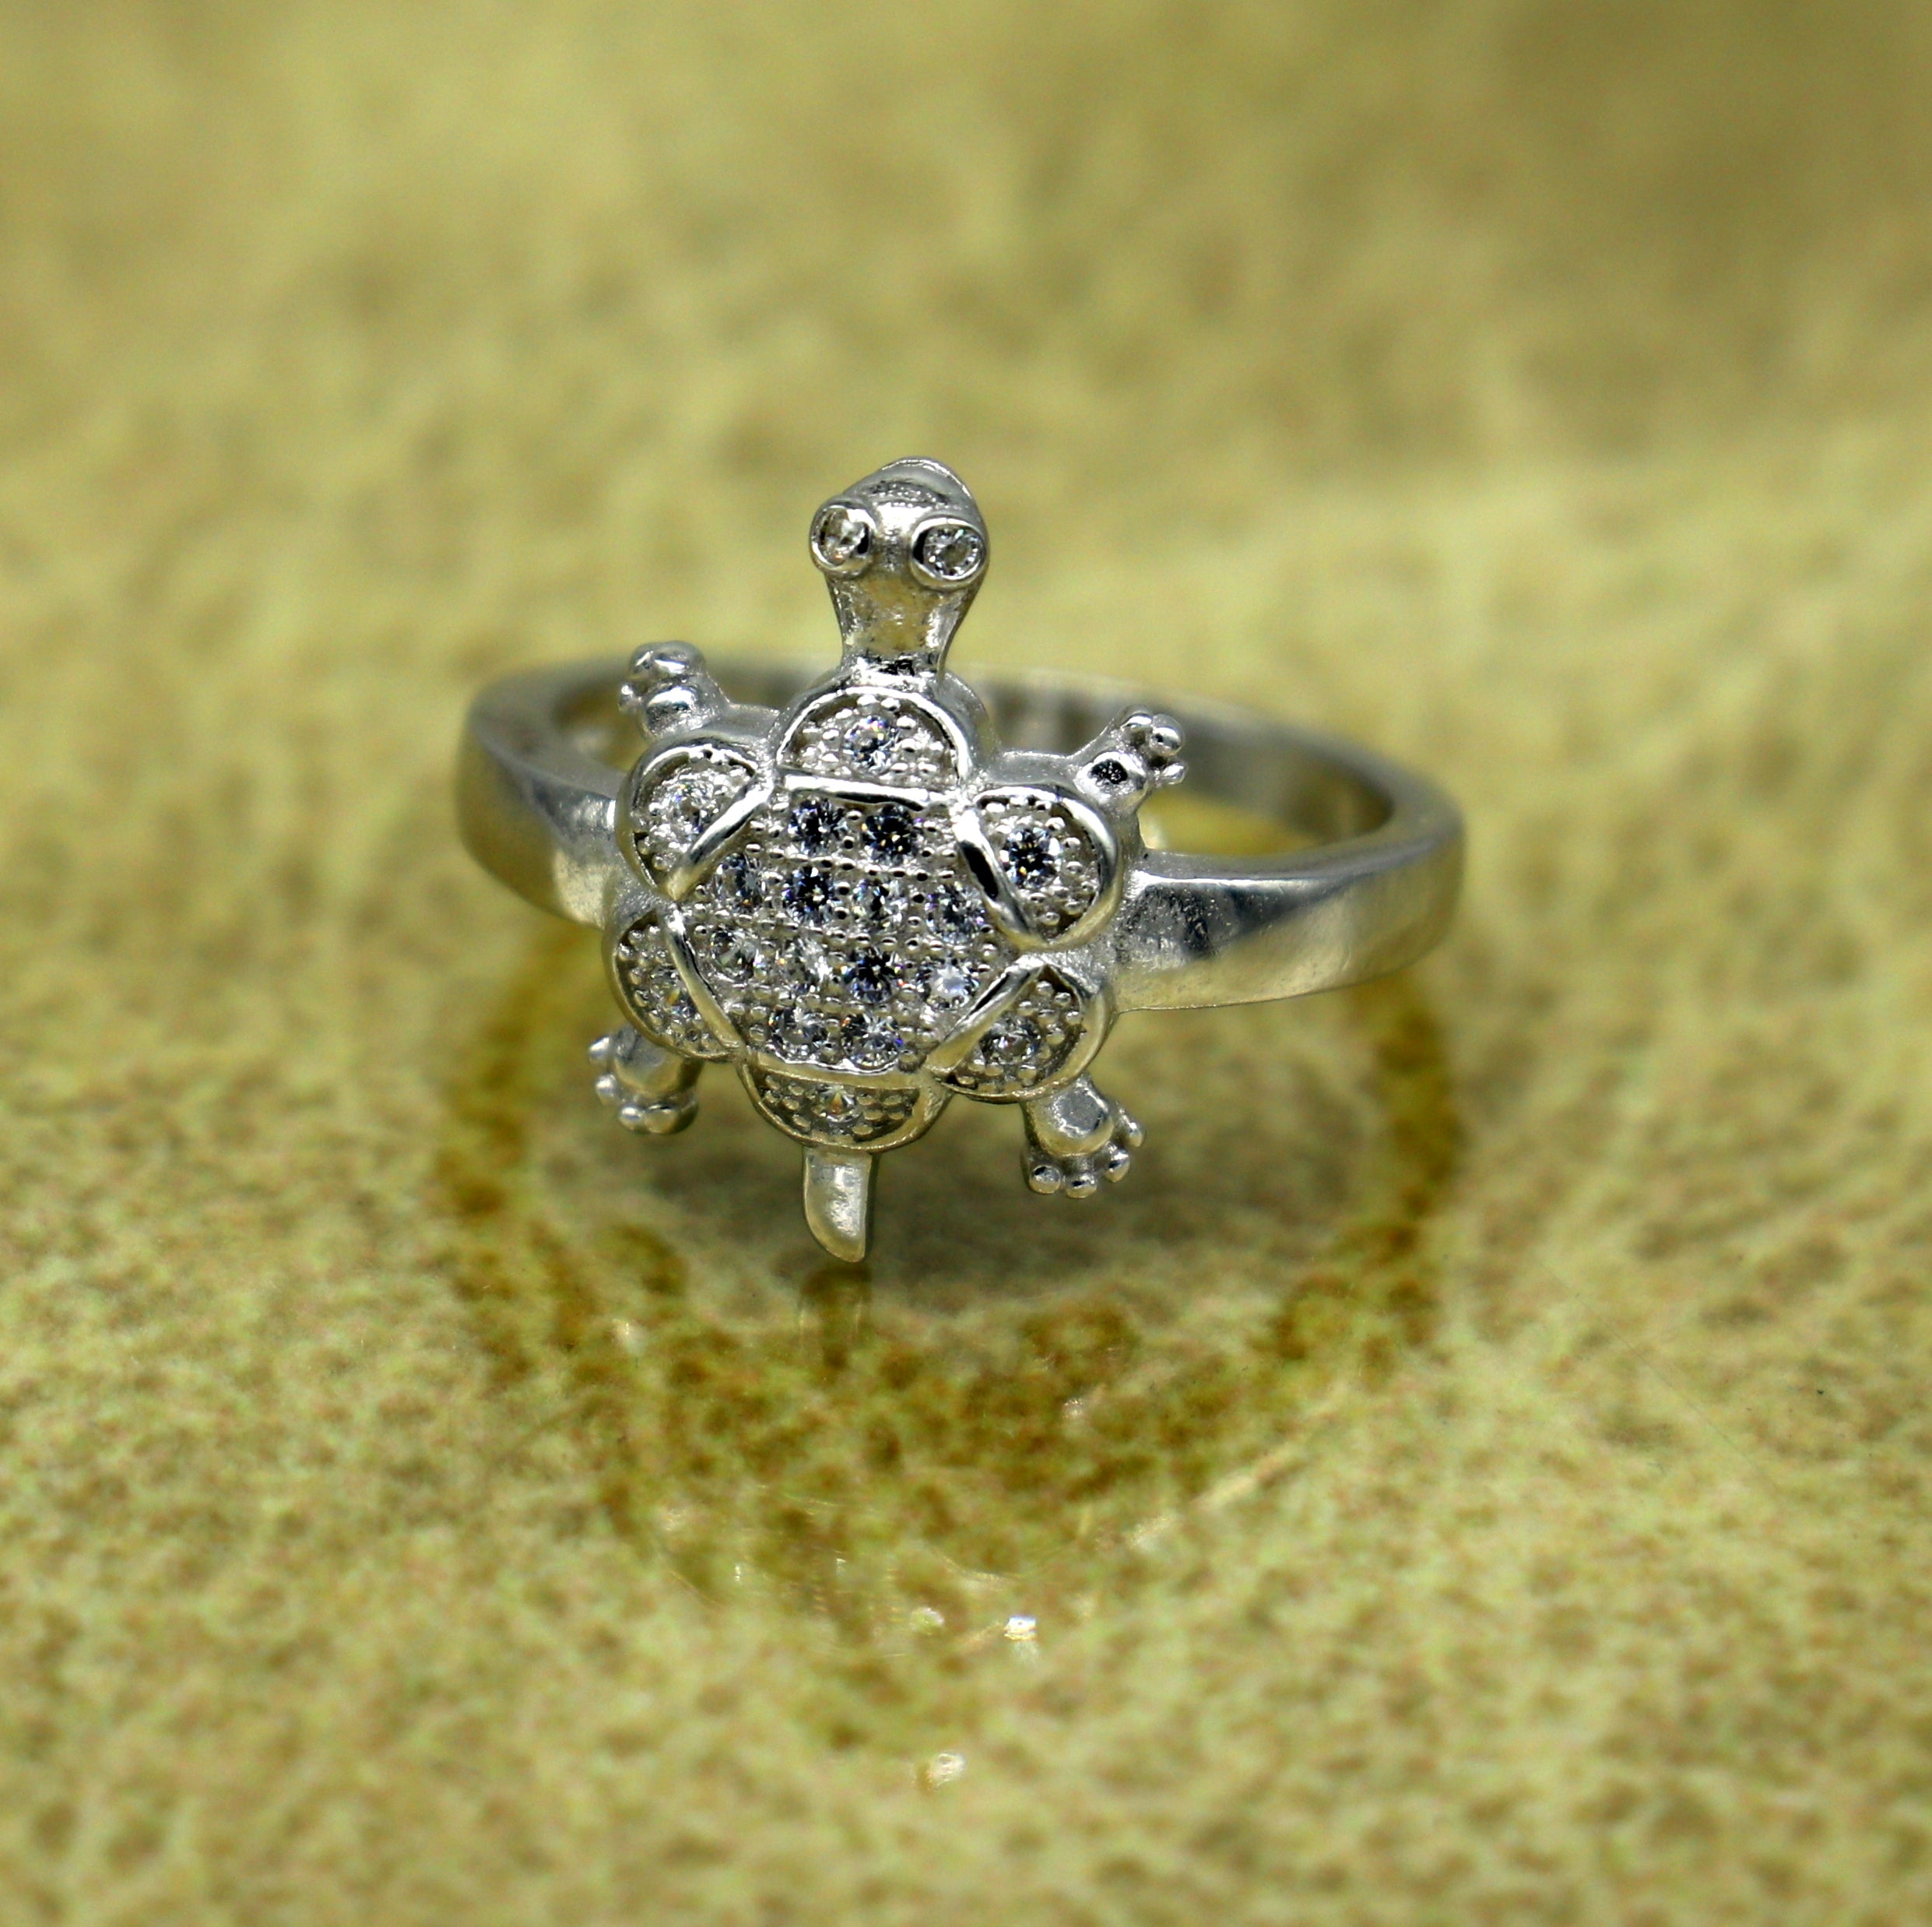 Our Best Rings Deals | Turtle jewelry, Turtle ring, Fine silver jewelry